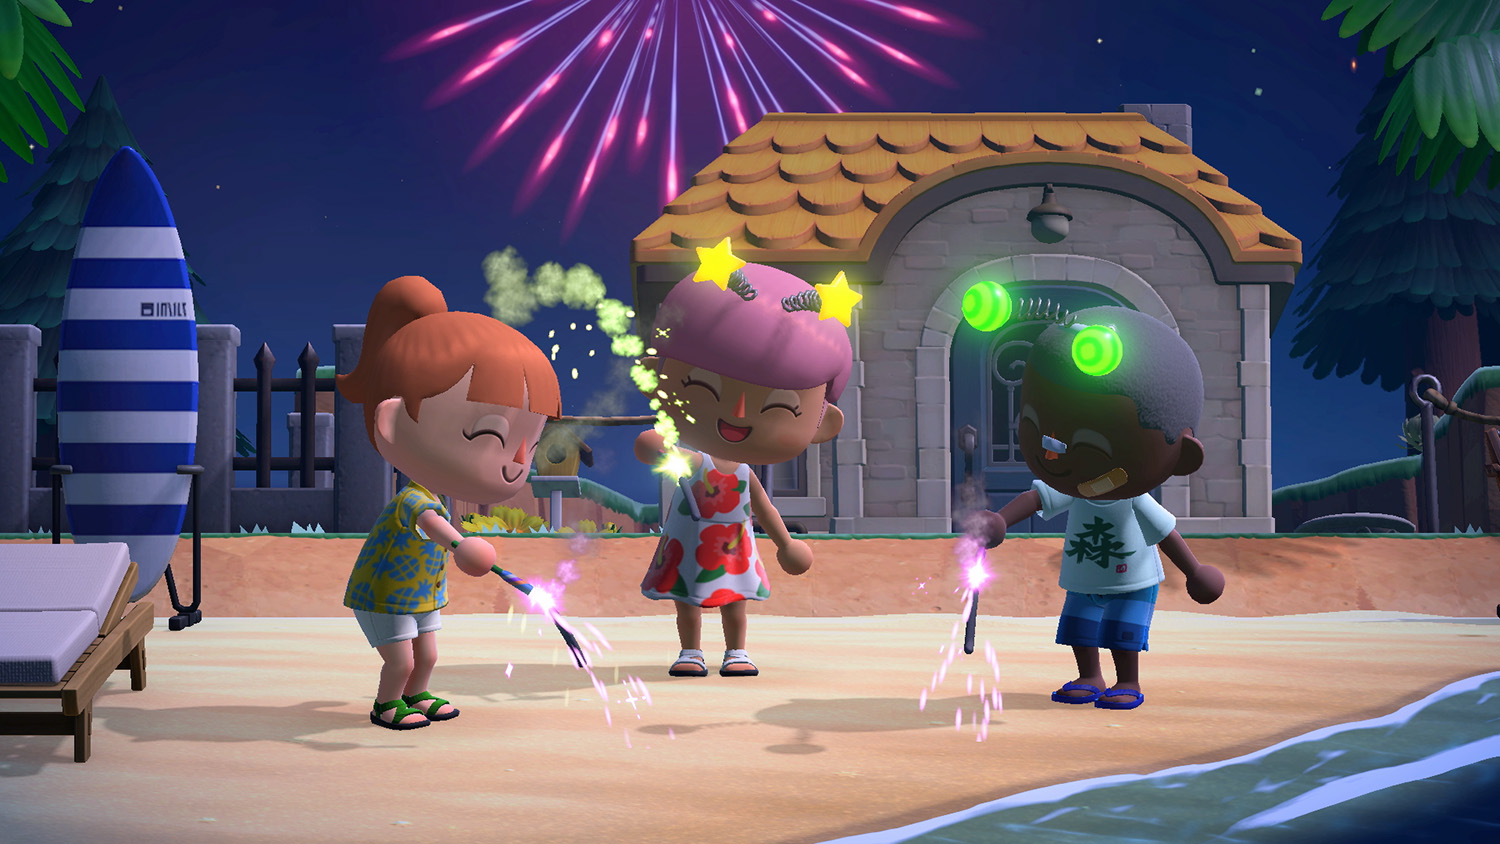 A fireworks show in Animal Crossing: New Horizons to represent the 4th of July